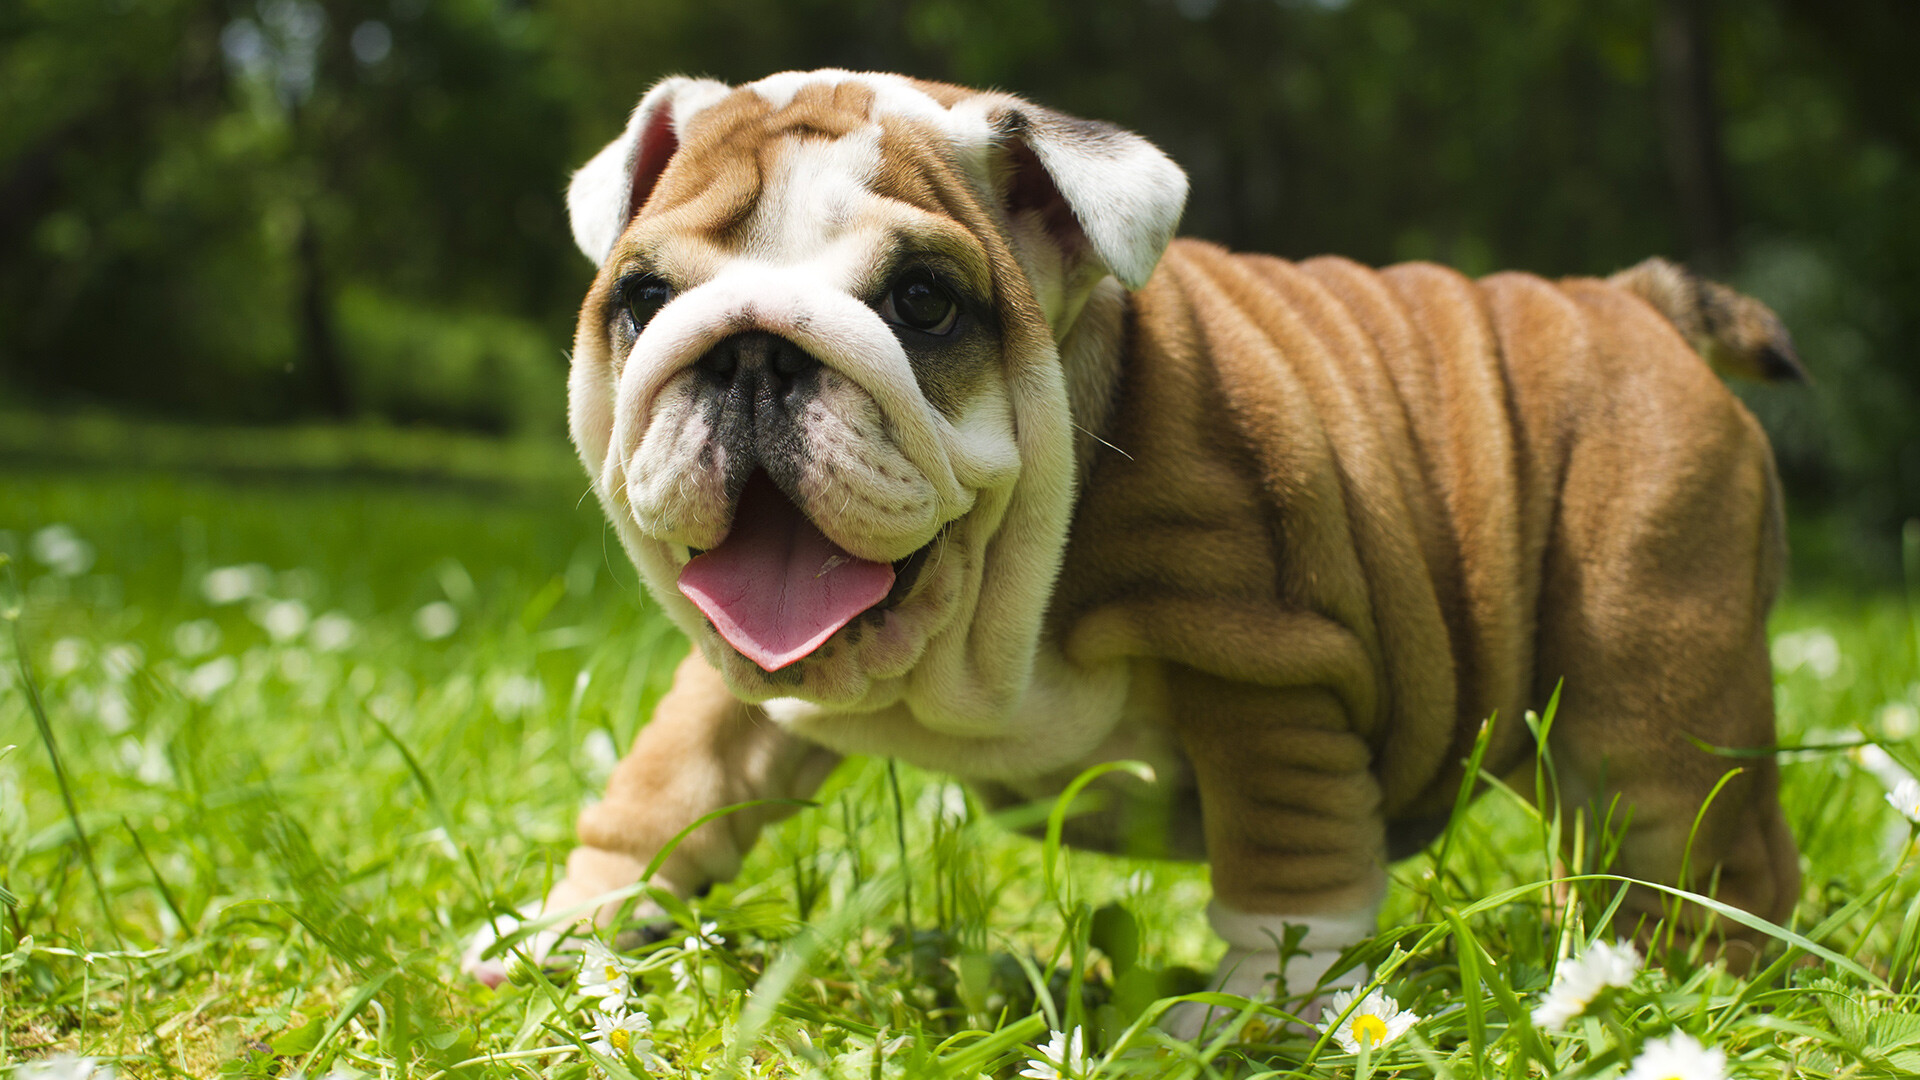 Bulldog: English breed, Puppy, Has a loose skin that forms wrinkles on the head and face. 1920x1080 Full HD Background.